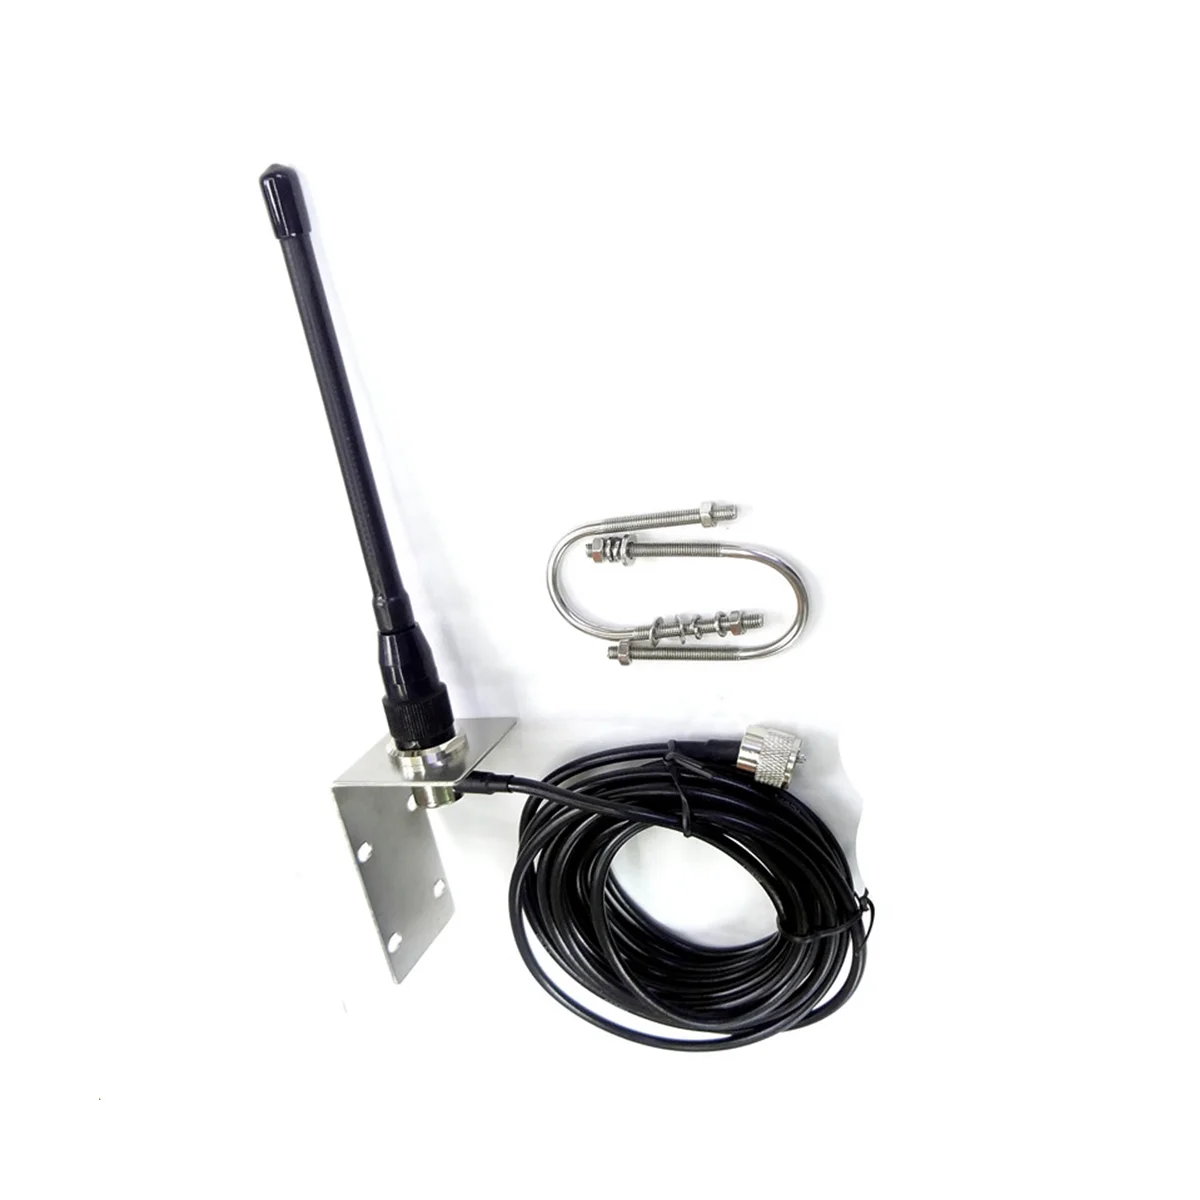 

VHF Marine Antenna 156-163Mhz Rubber Waterproof Mast Aerial with 5M RG-58 Cable for Boat Sailboat Yacht